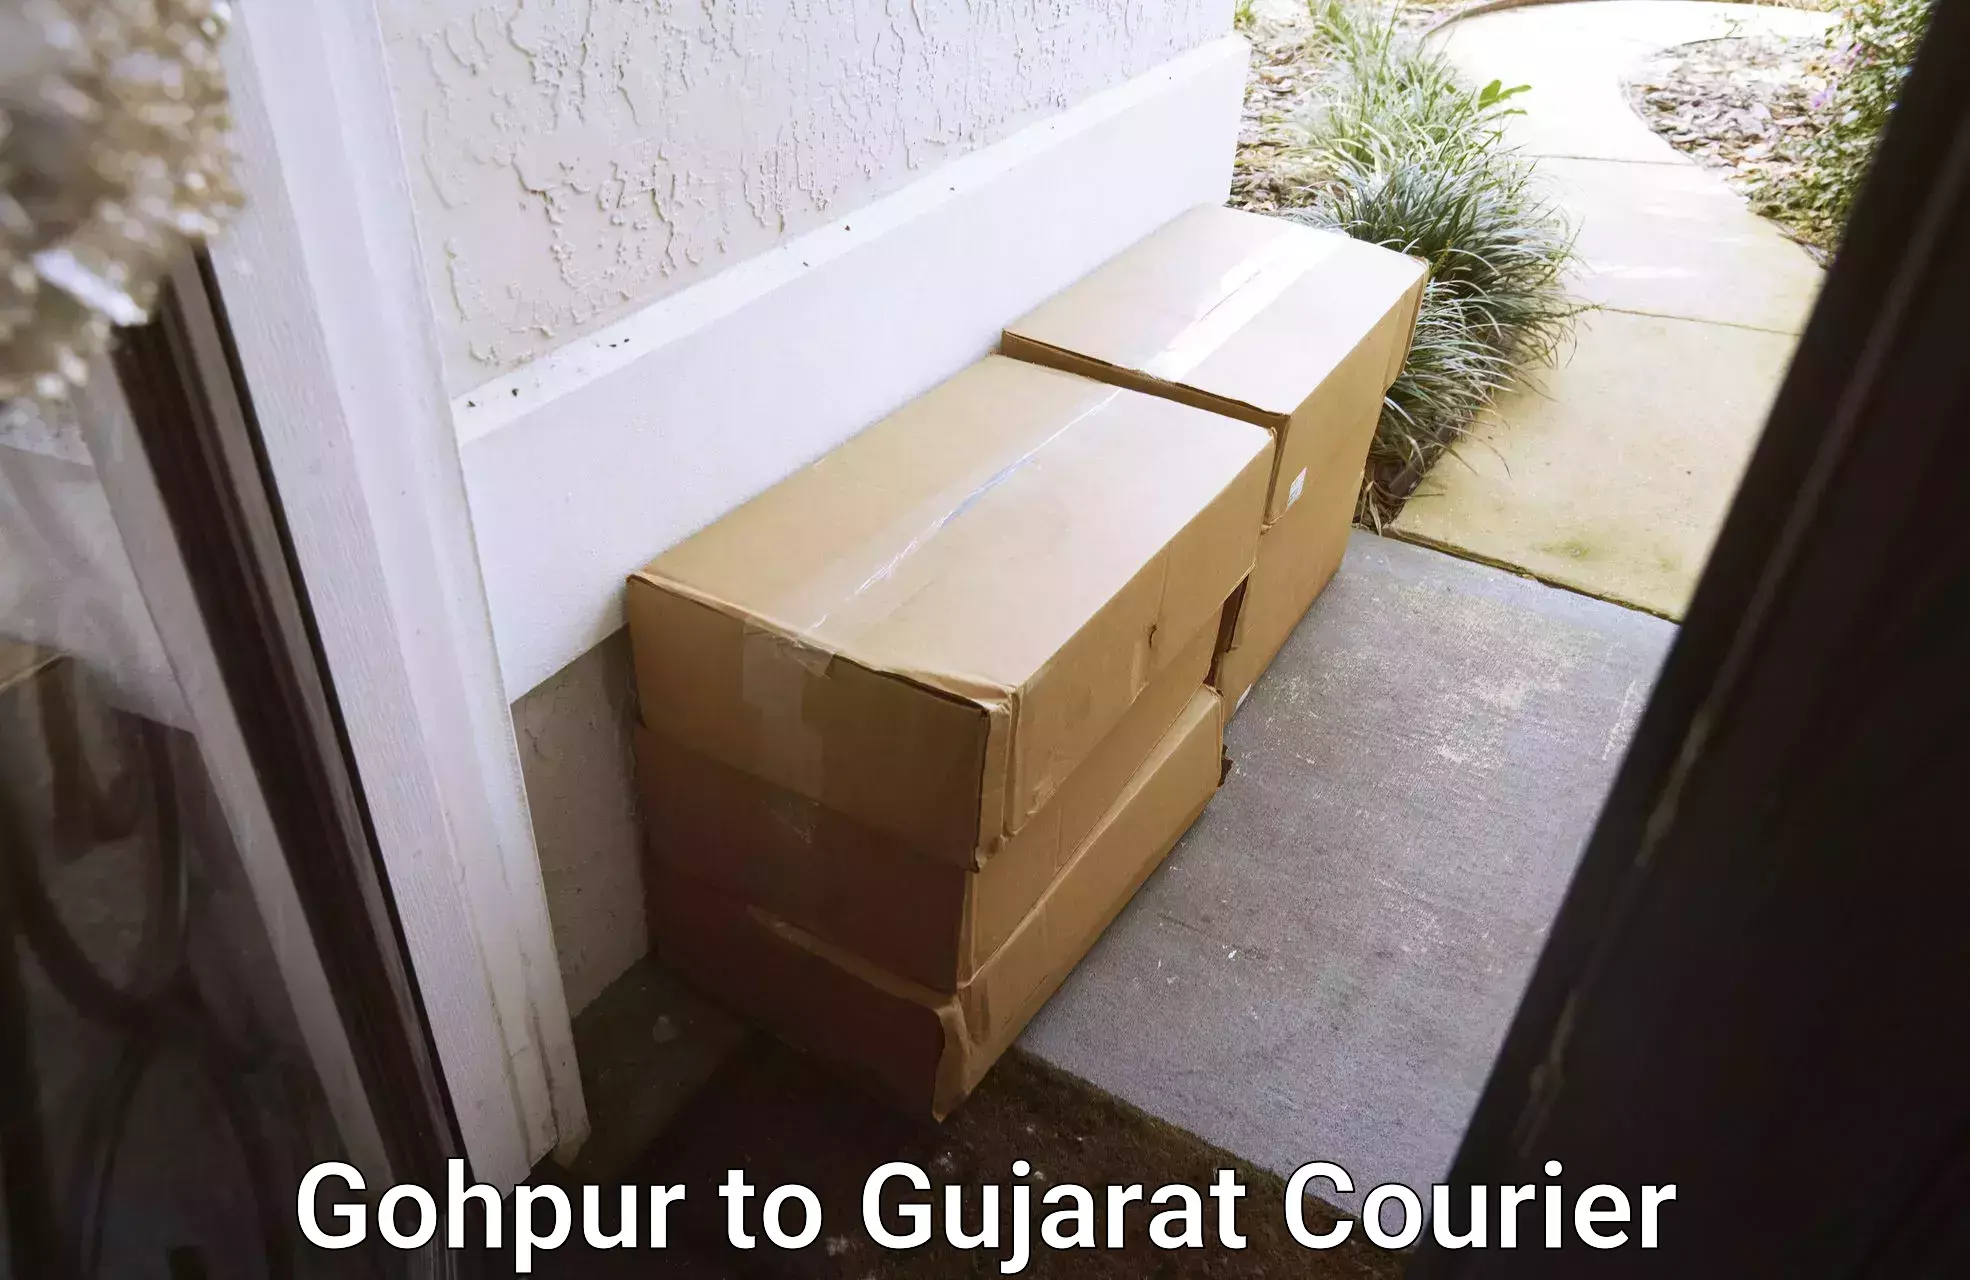 Advanced delivery network Gohpur to Rajkot